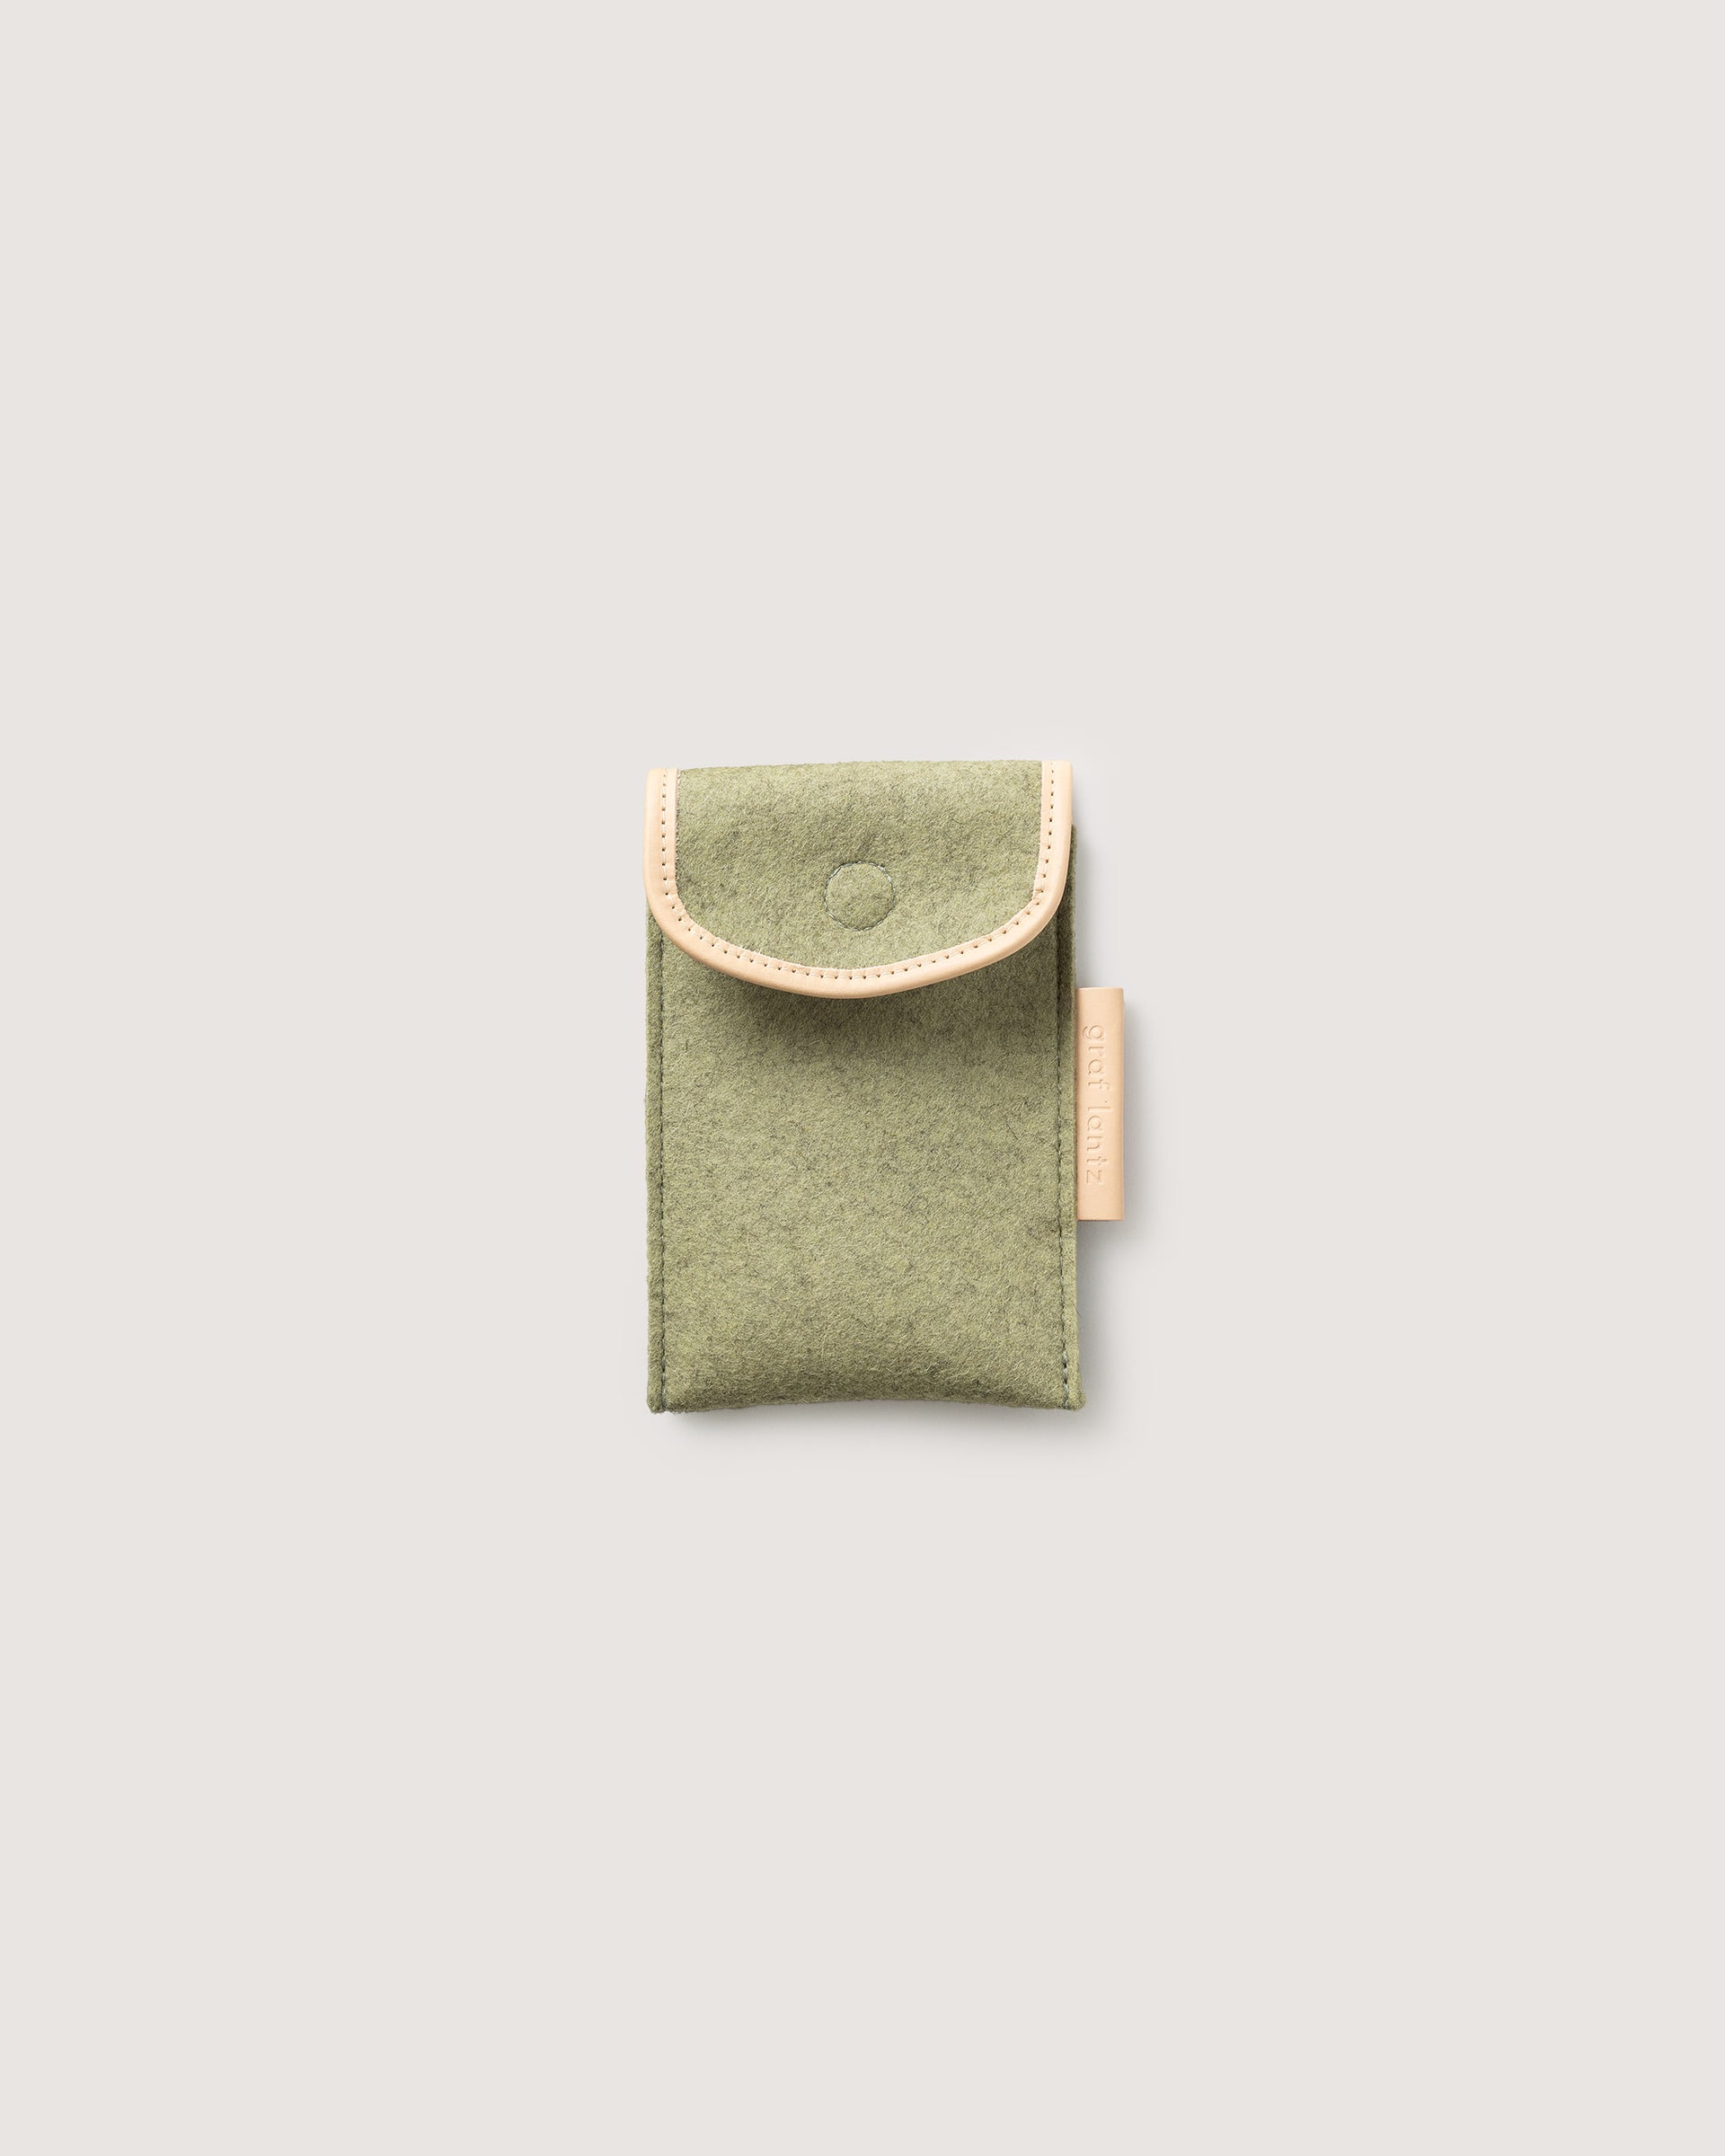 Protect your phone or other small items with our Envelope Accessory Sleeve. Here in sage color